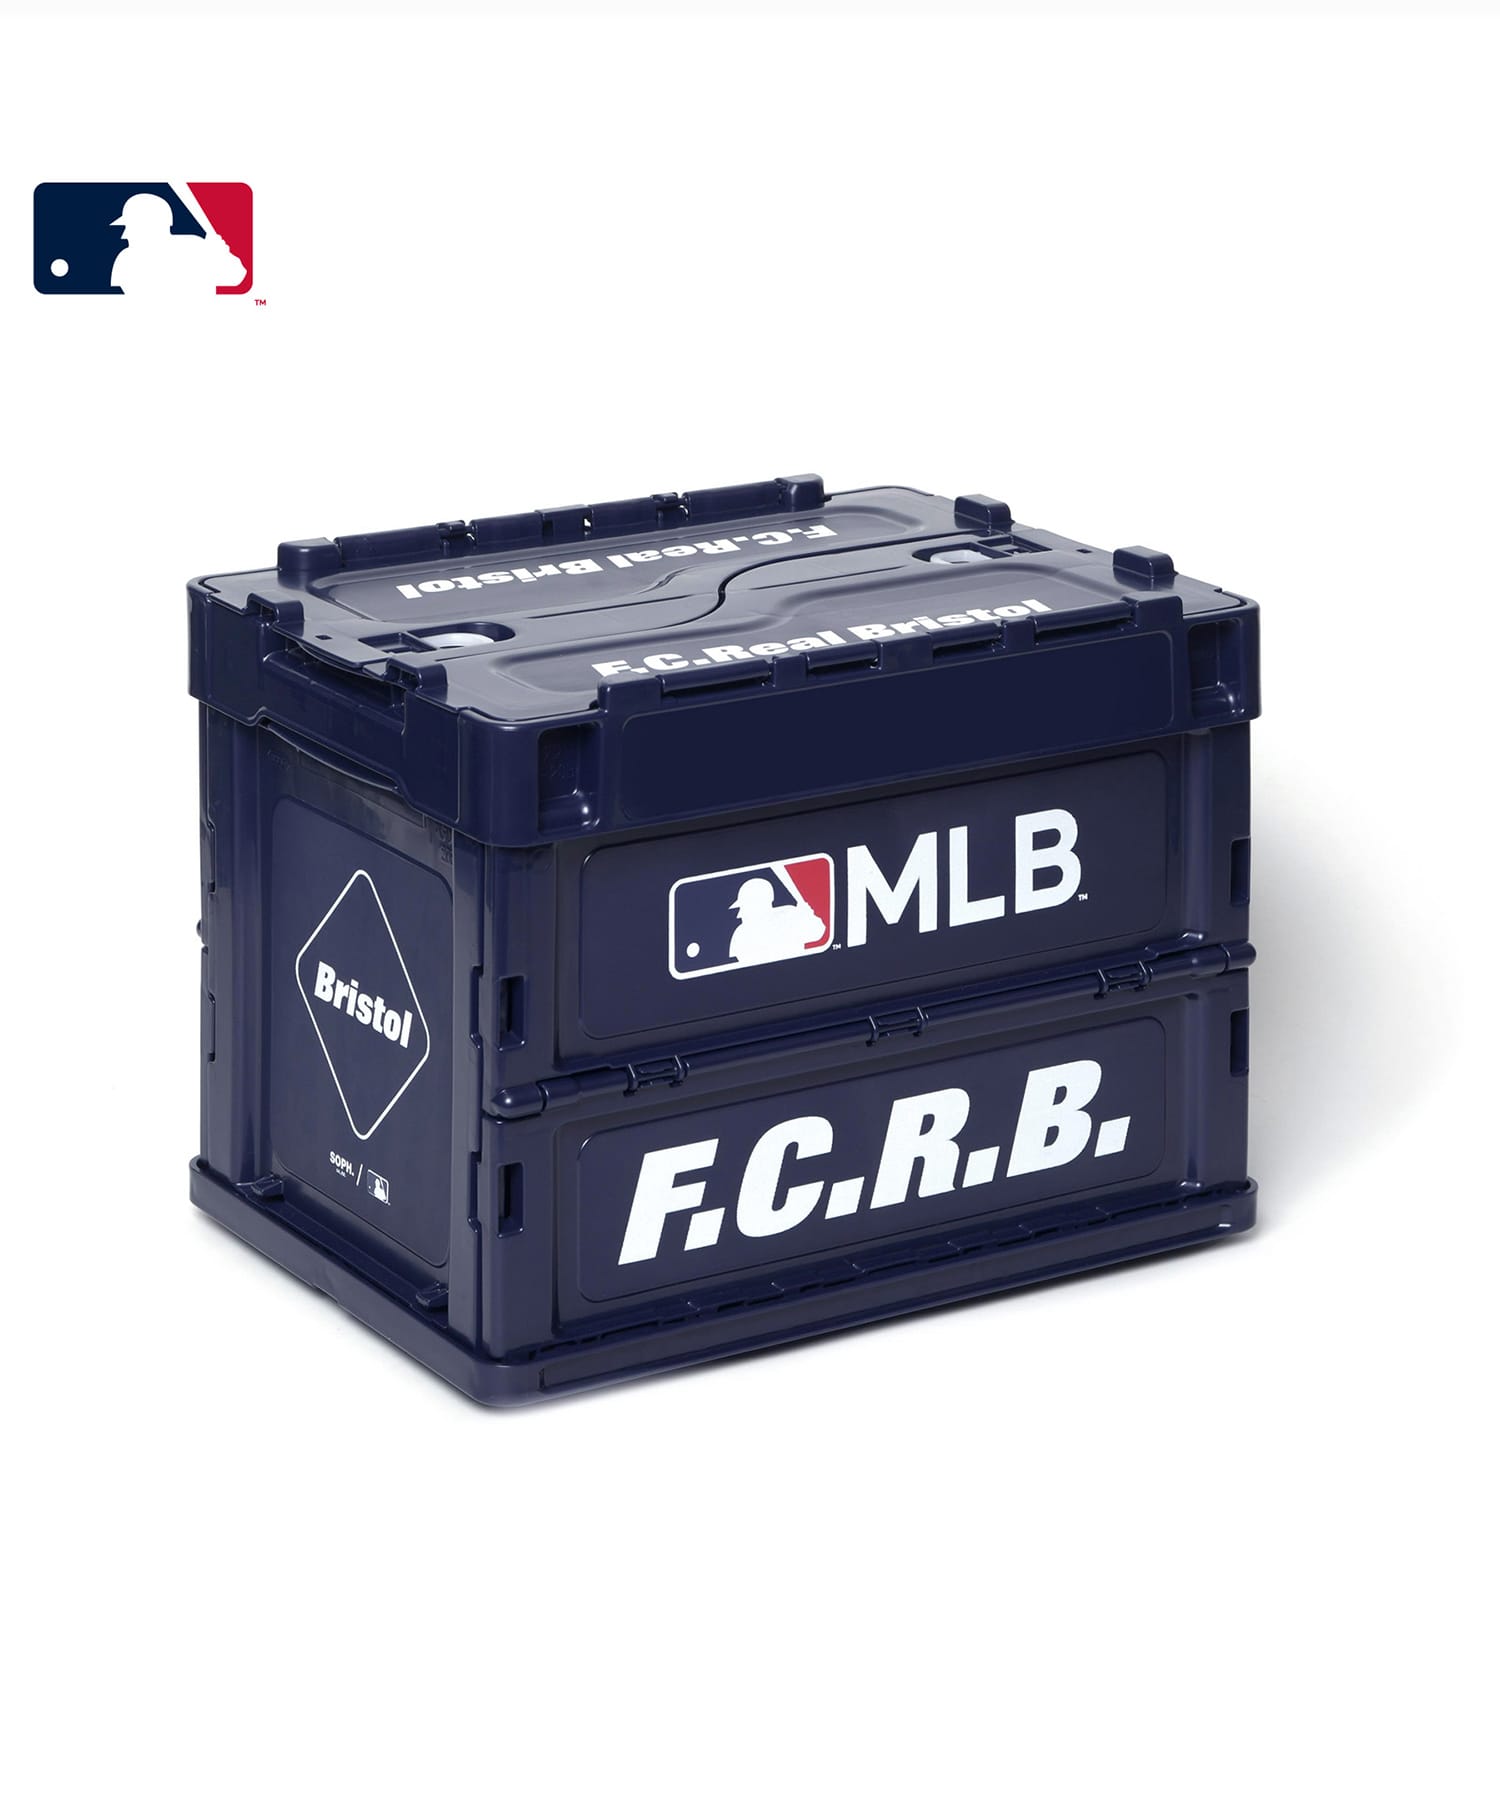 MLB TOUR SMALL FOLDABLE CONTAINER | F.C.Real Bristol